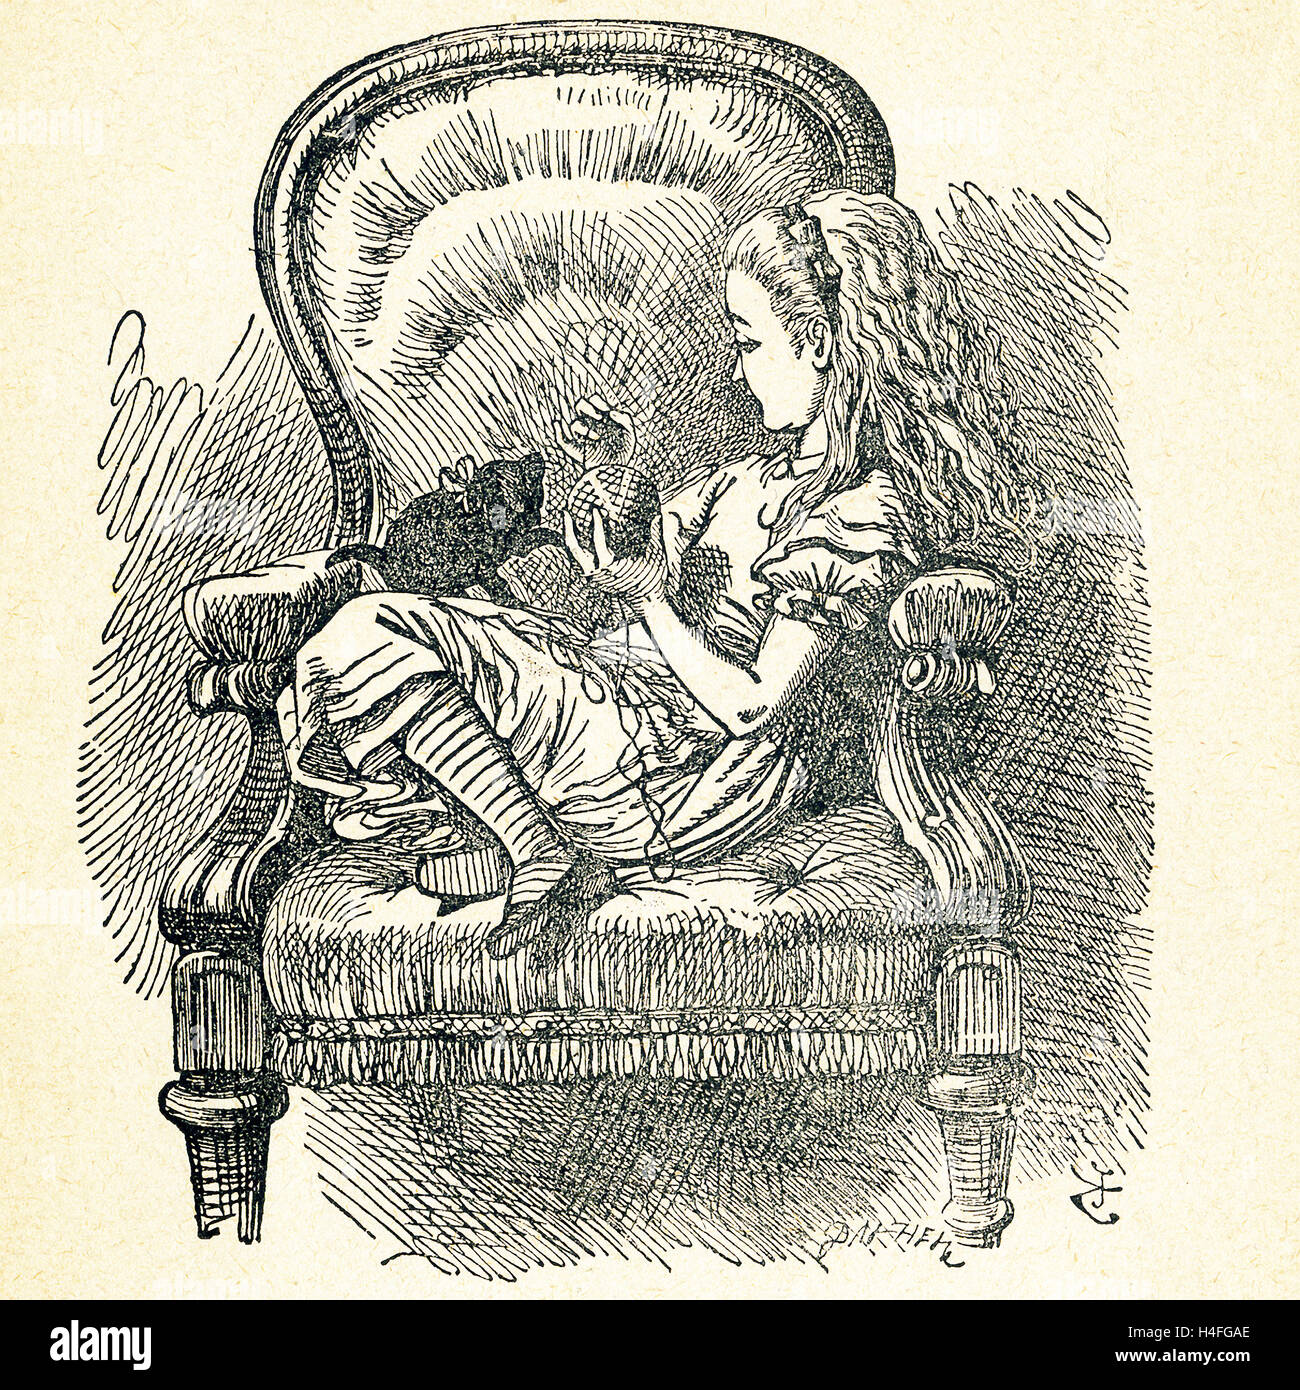 This illustration of Alice sitting with a black cat in a chair in the house is from 'Through the Looking-Glass and What Alice Found There' by Lewis Carroll (Charles Lutwidge Dodgson), who wrote this novel in 1871 as a sequel to 'Alice's Adventures in Wonderland.' The black cat here is 'Kitty,' the kitten of Dinah, Alice's cat in the Wonderland novel. Stock Photo